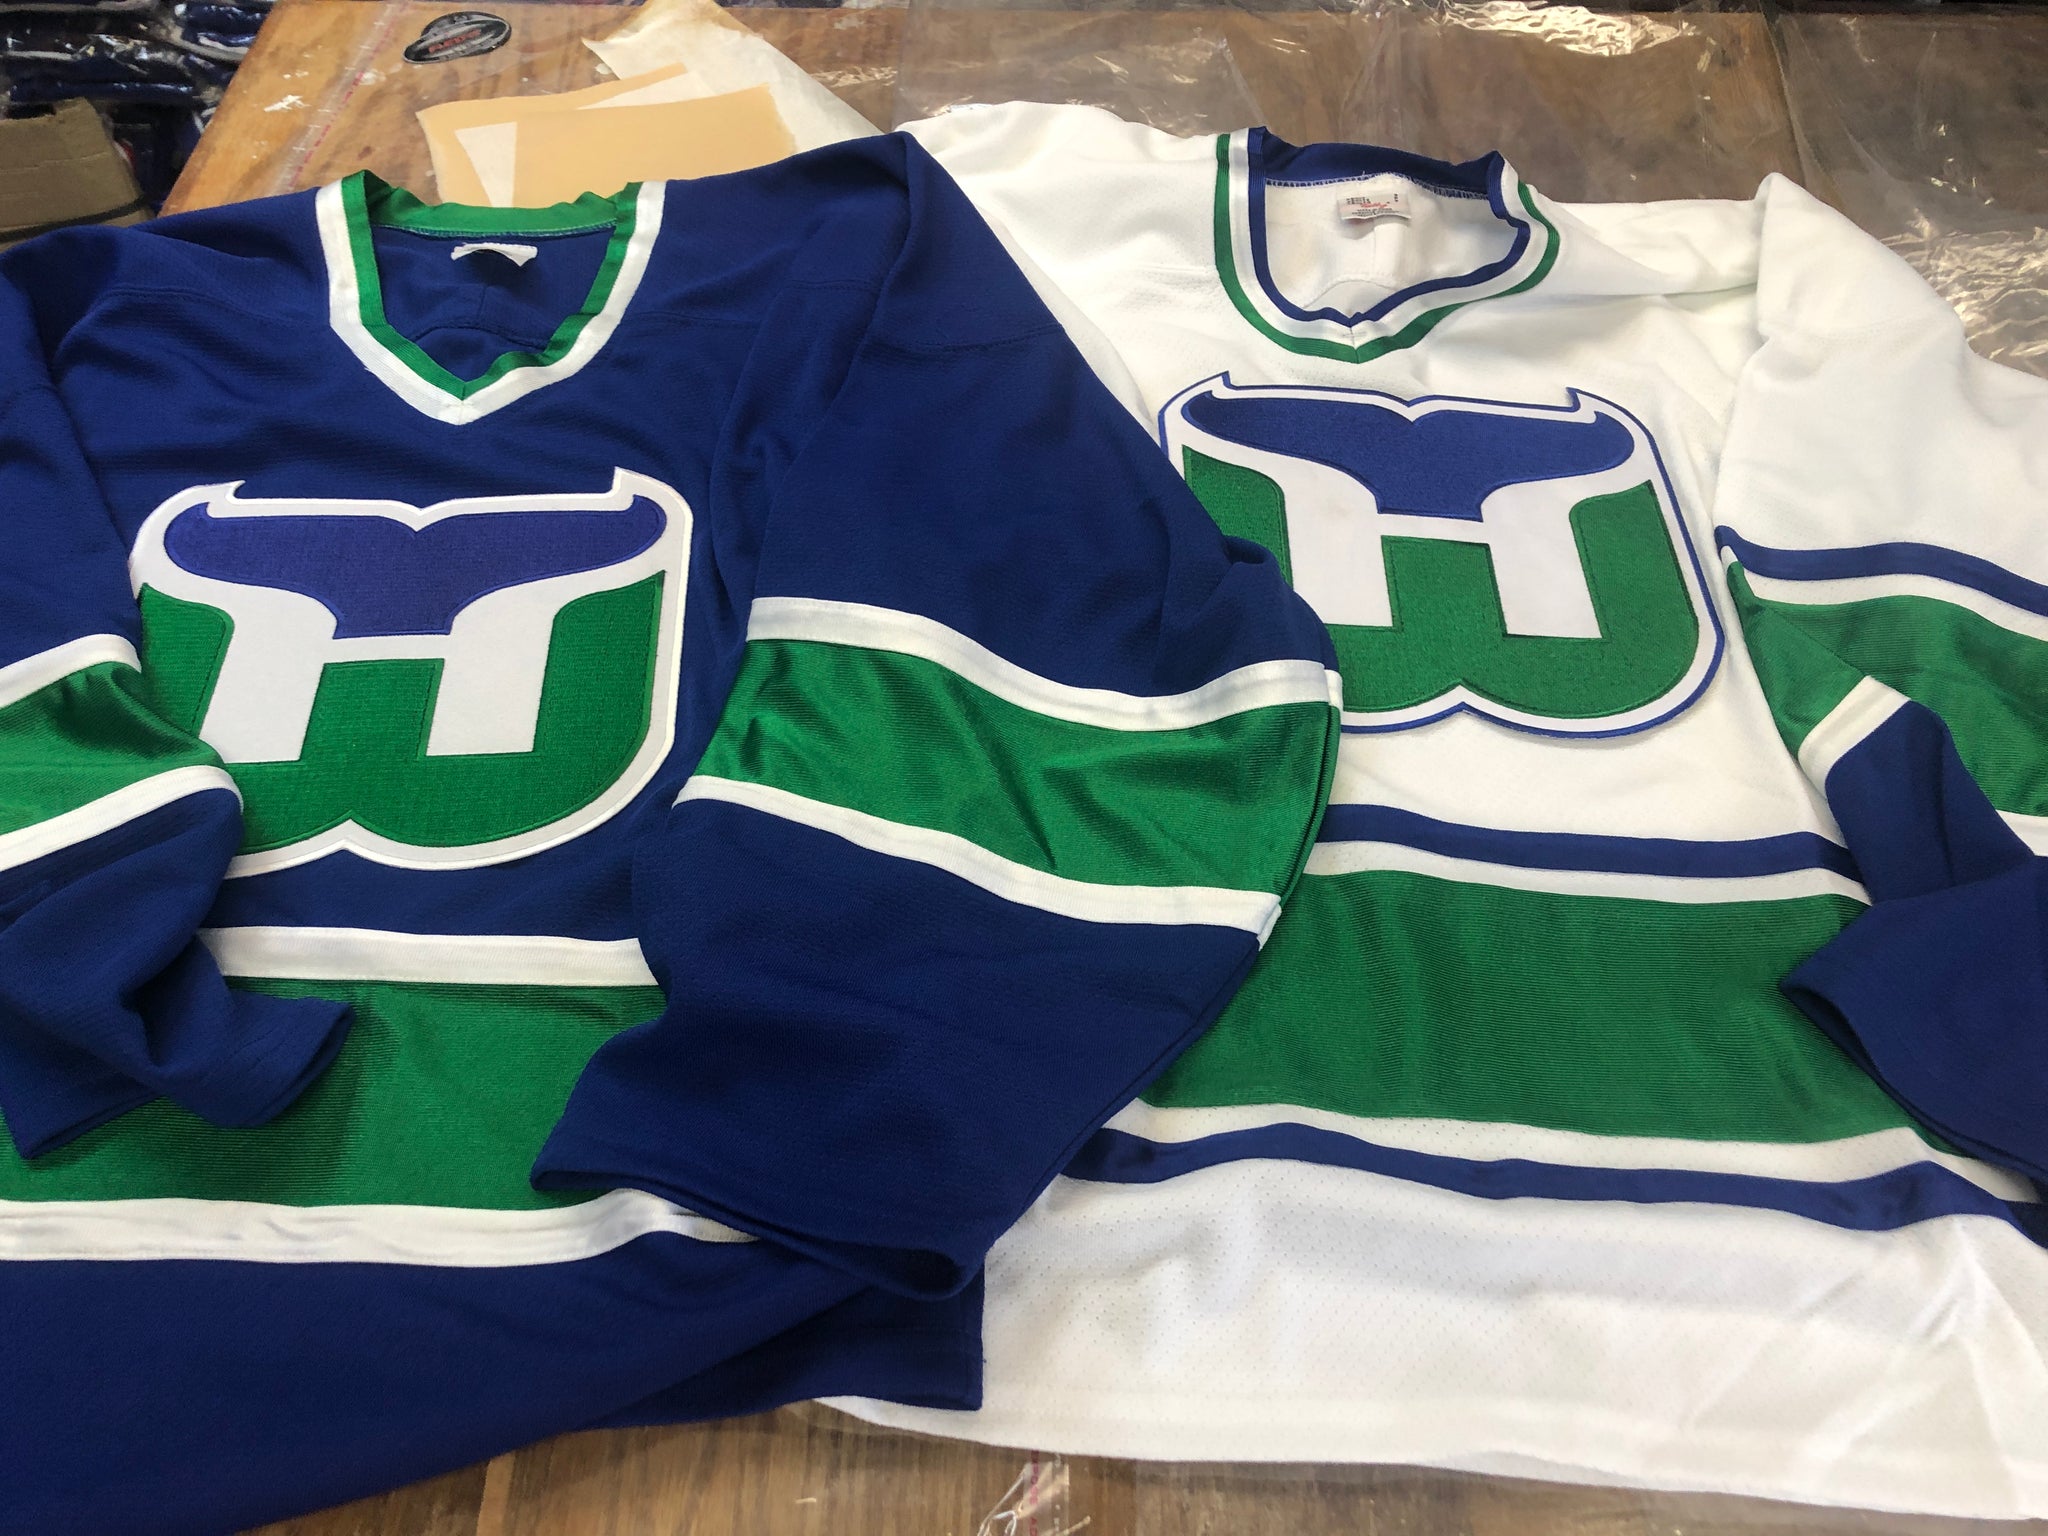 NHL will see players in Whalers uniforms again today